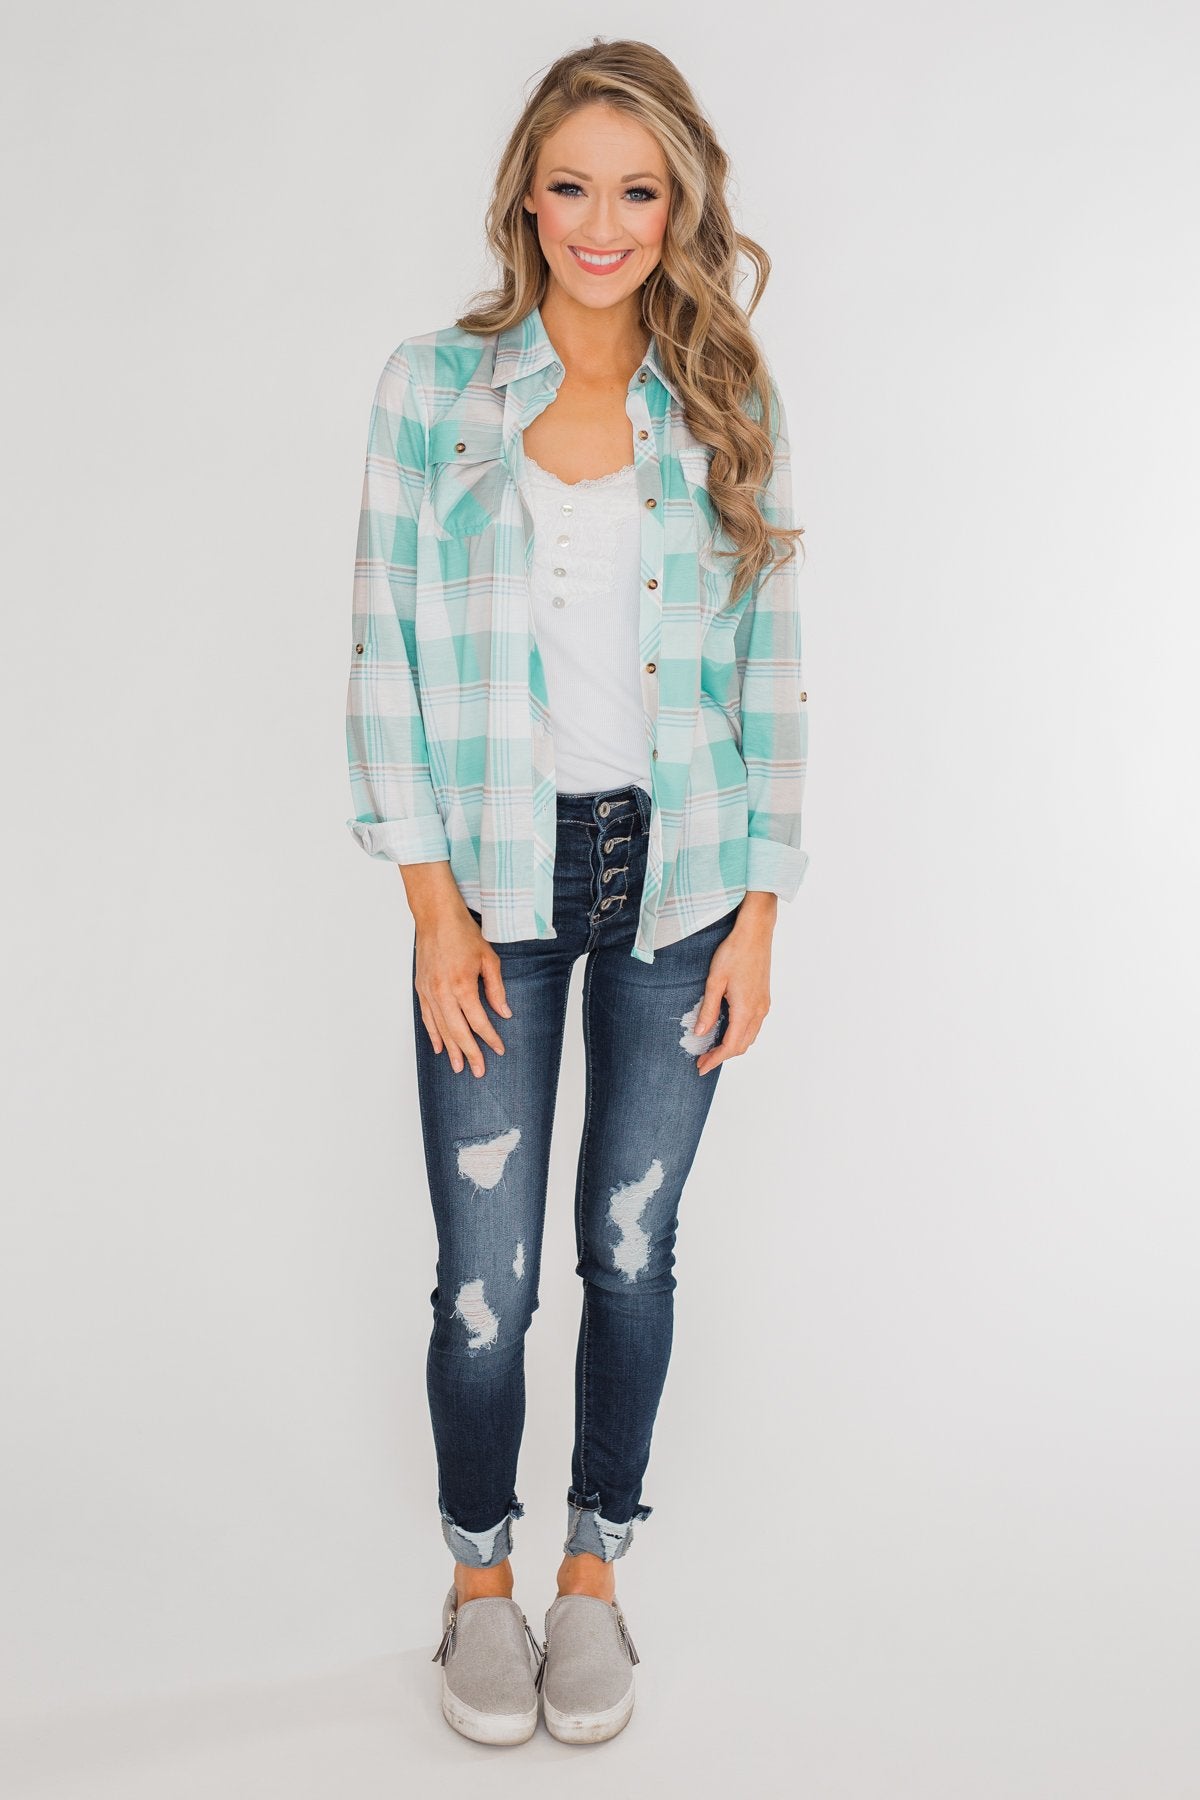 Signals to You Plaid Button-Up Top- Tiffany Blue